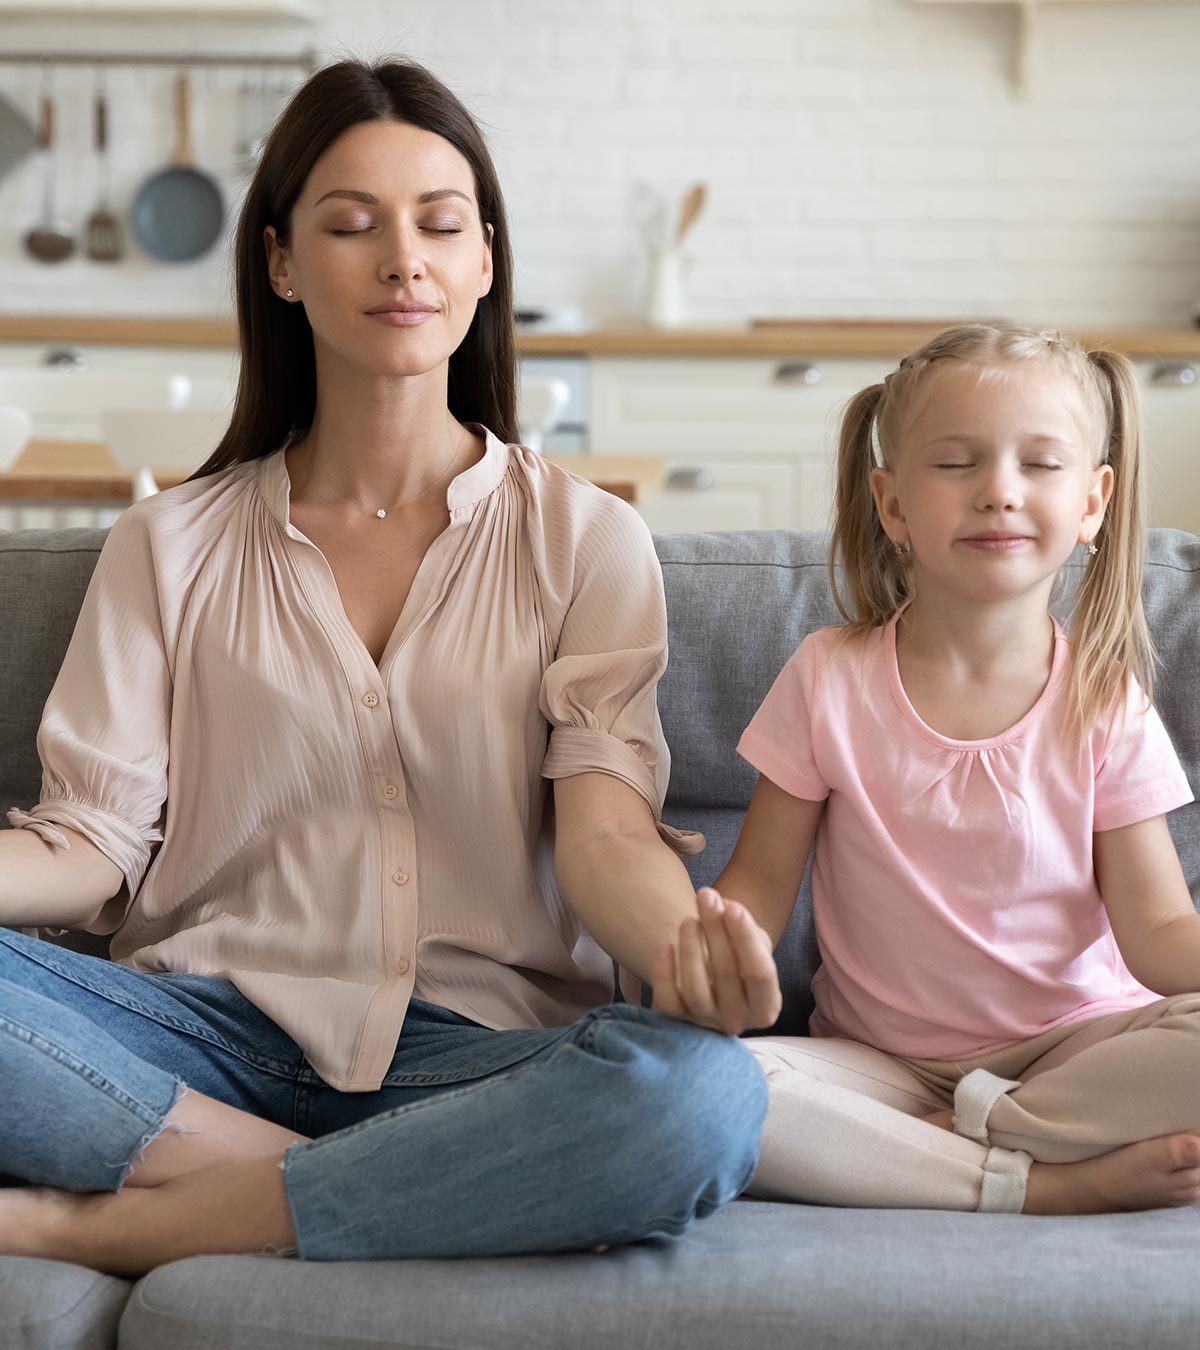 Top 10 Relaxation Techniques For Kids And Their Benefits